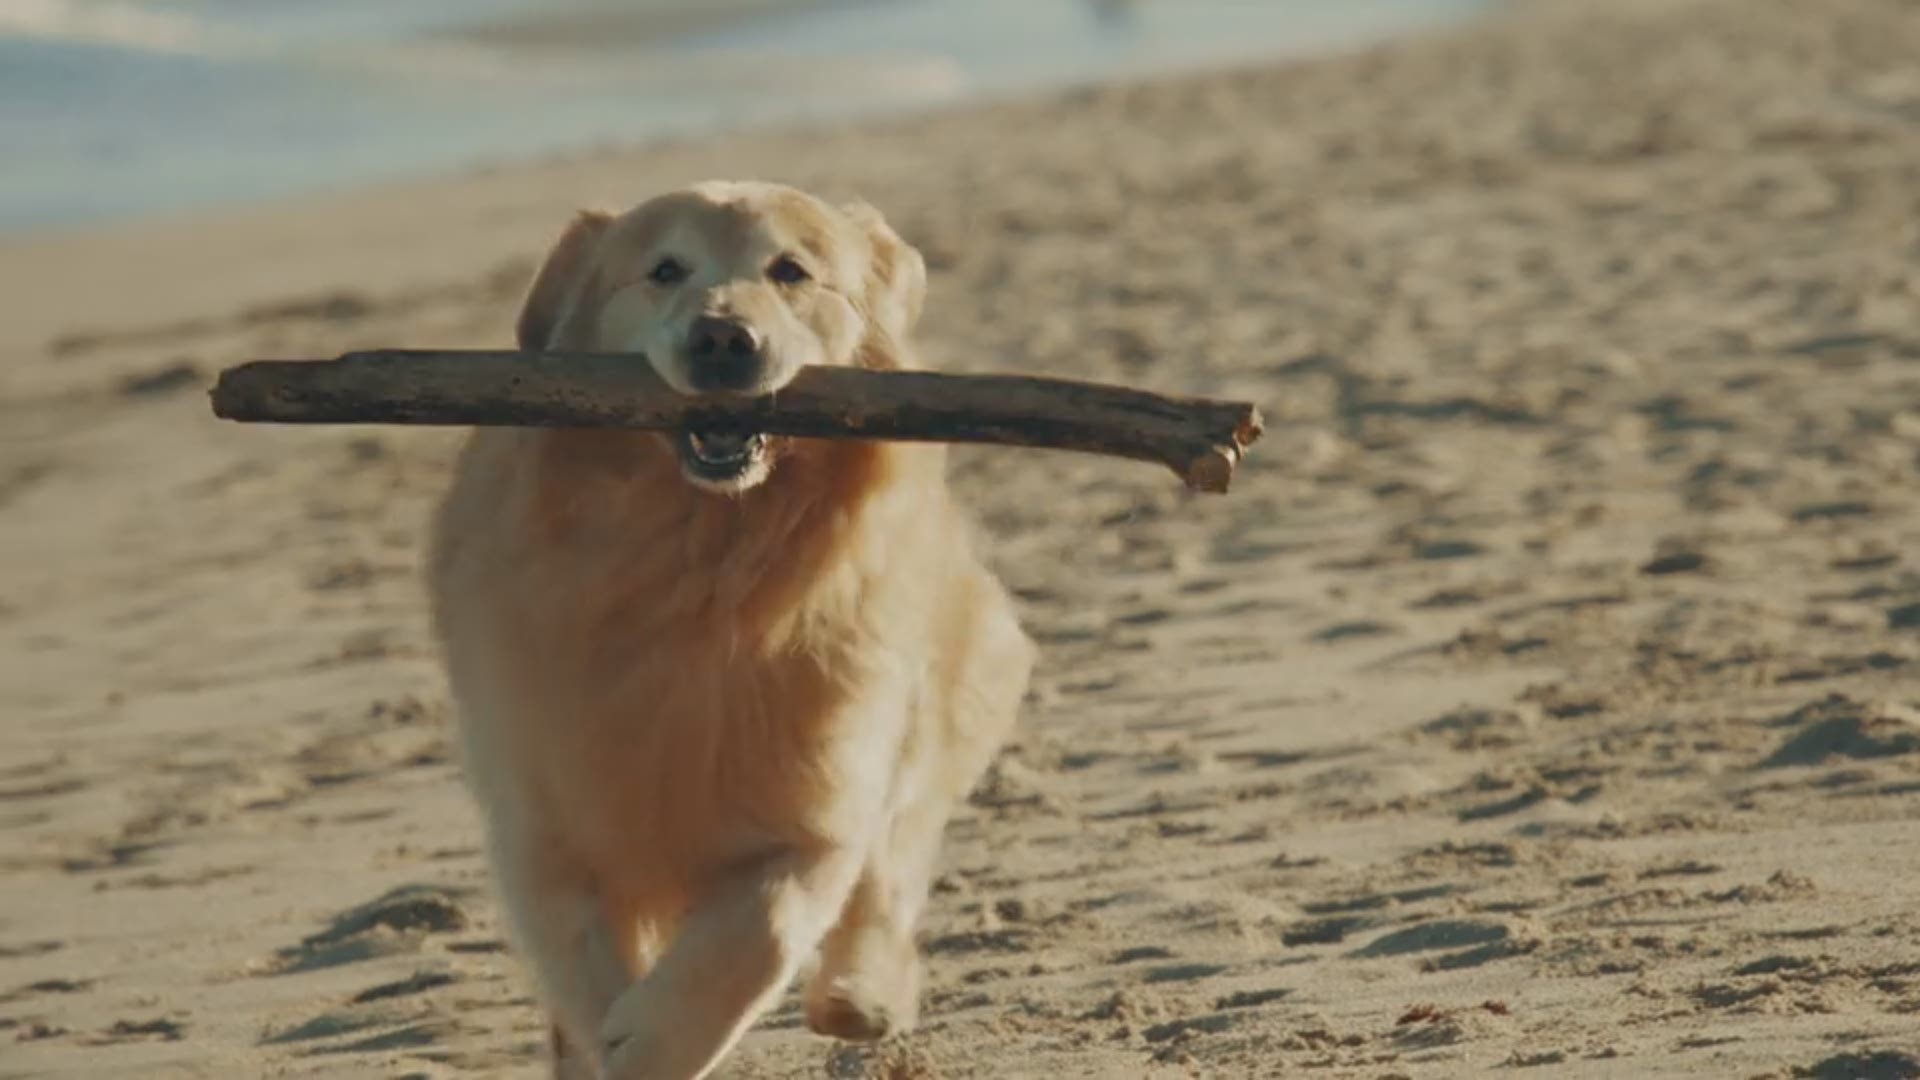 To thank the vets that saved his dog, he bought a $6 million Super Bowl commercial for them.